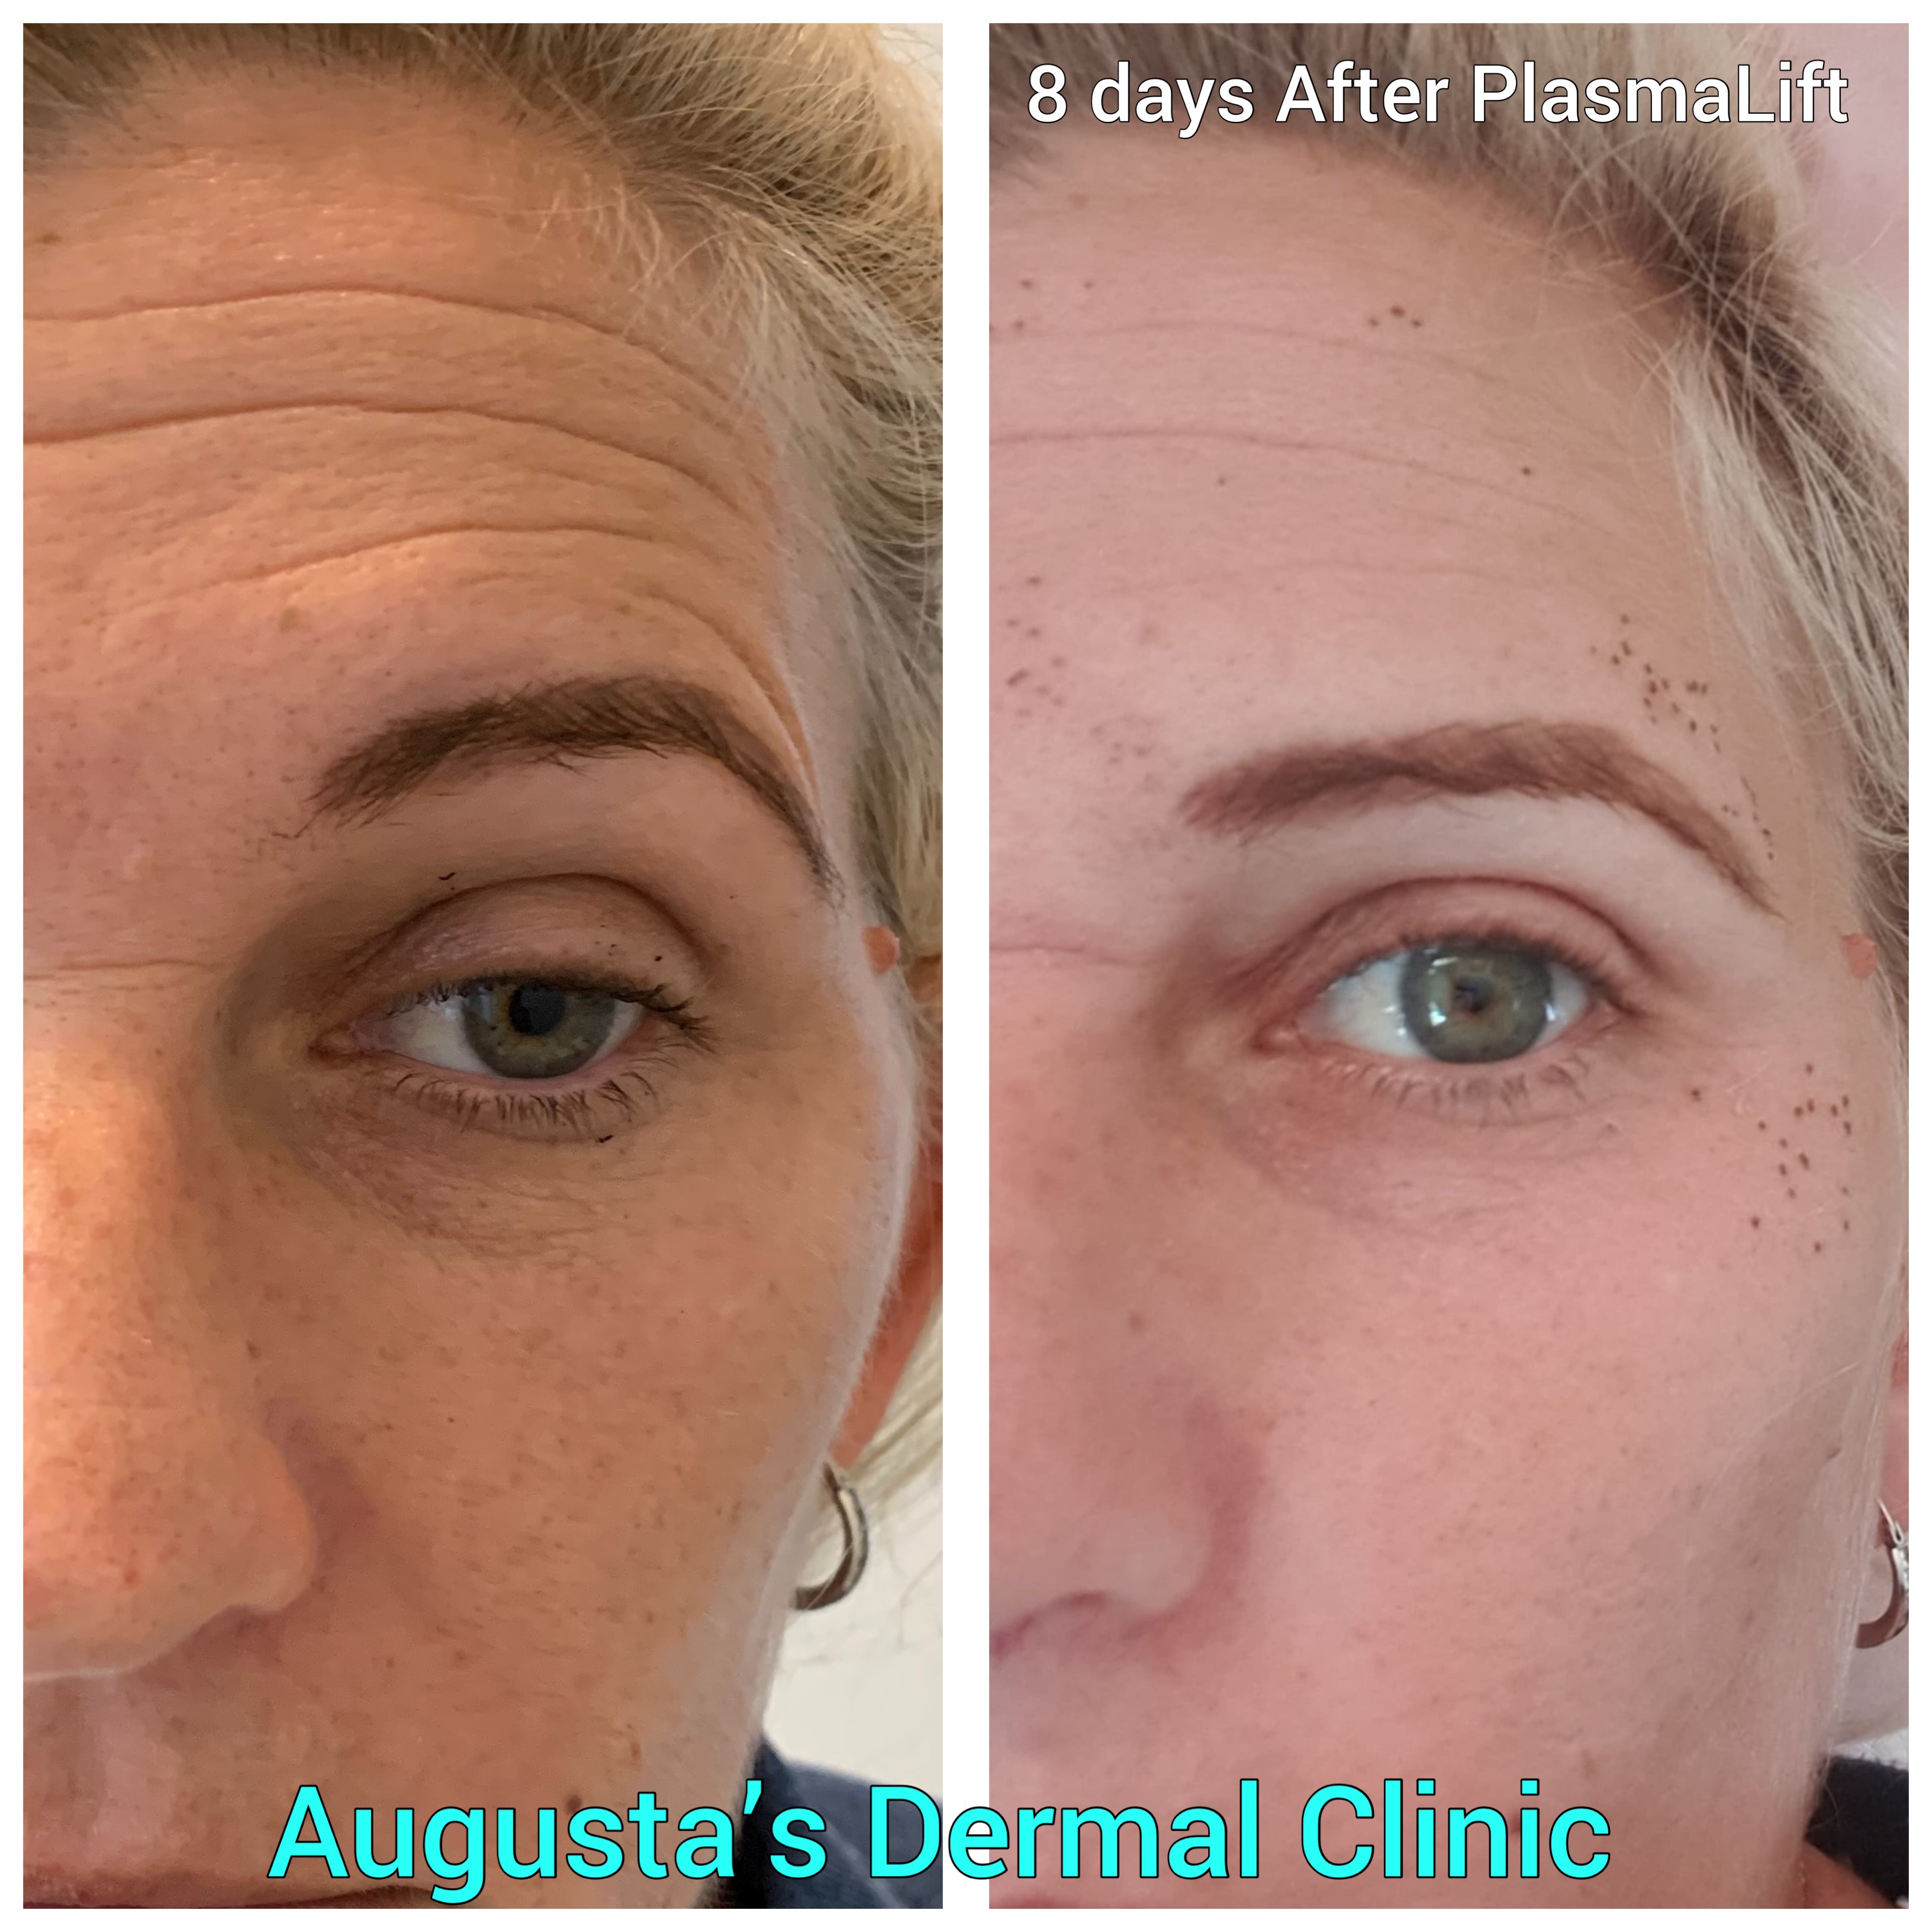 Shanna has had PlasmaLift treatment on her deep lines on her forehead and lines around her eyes . This is day 8 after her treatment and the rest of the carbon crusts spots will be off in the next day. The skin improves upto 3 months after having PlasmaLift . A second treatment can be performed after this time.